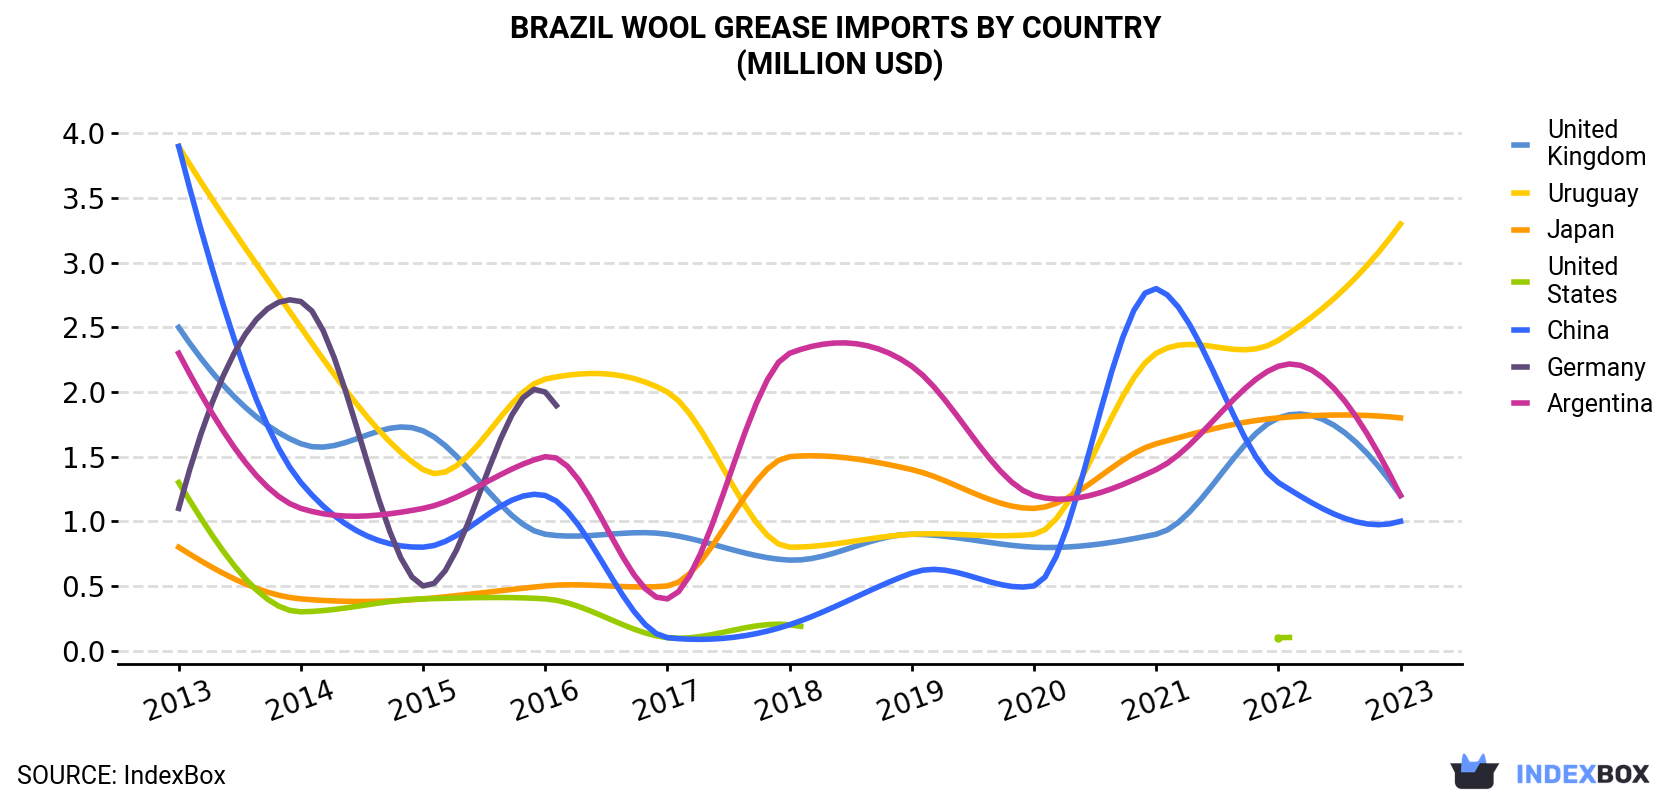 Brazil Wool Grease Imports By Country (Million USD)